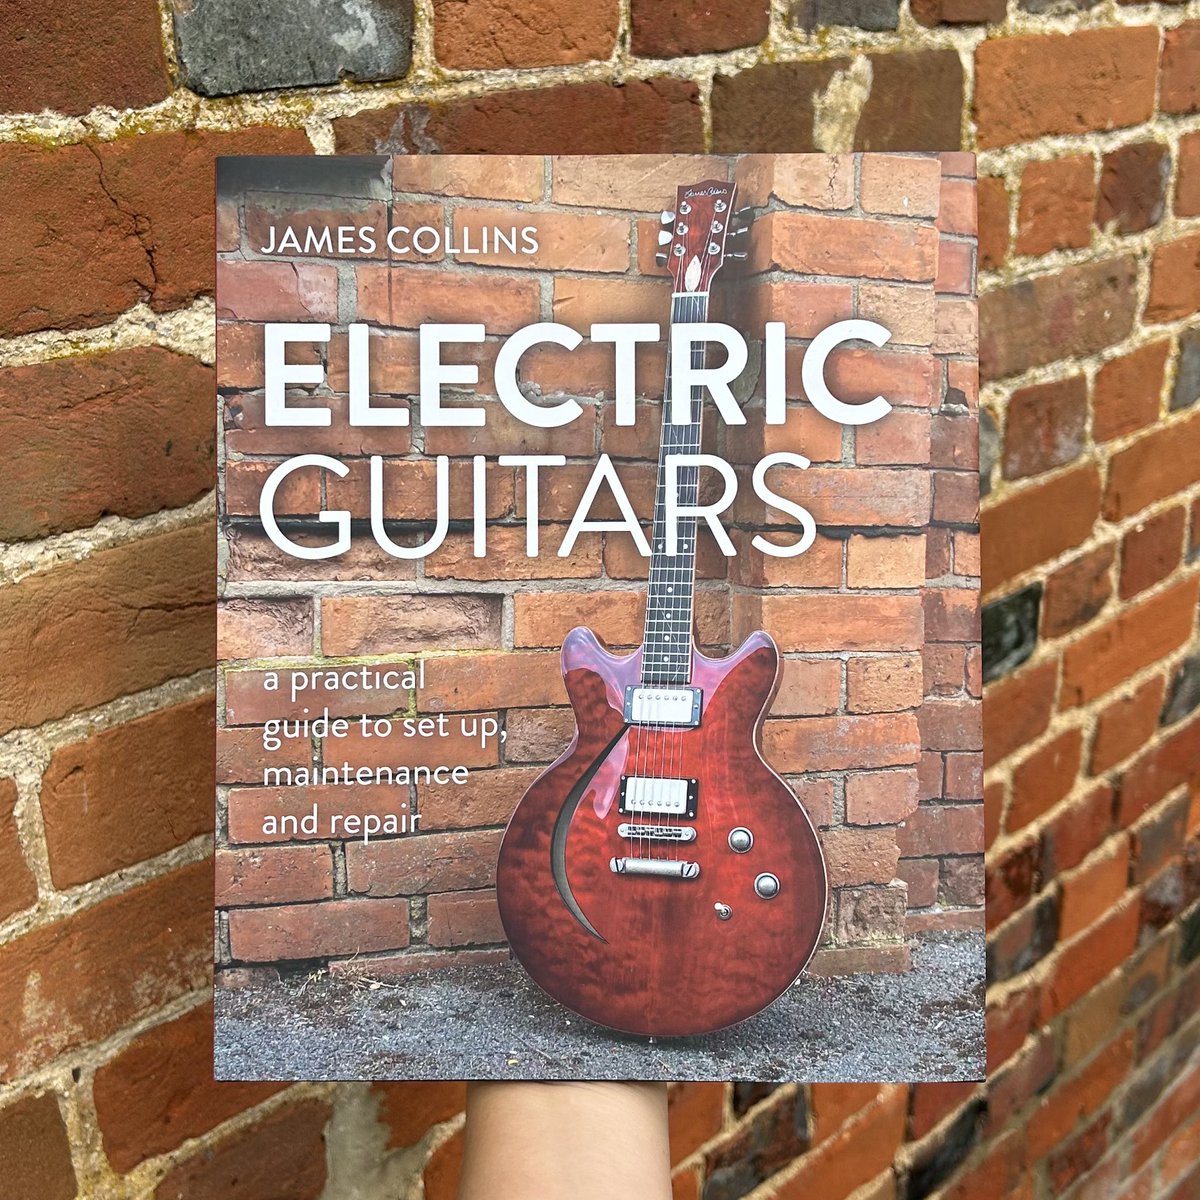 Congratulations to James Collins on the publication of Electric Guitars. 🎸 This book will be an invaluable resource for beginners who want to learn to set up and look after their guitars, to aspiring and professional touring techs who want to work on other people’s guitars.